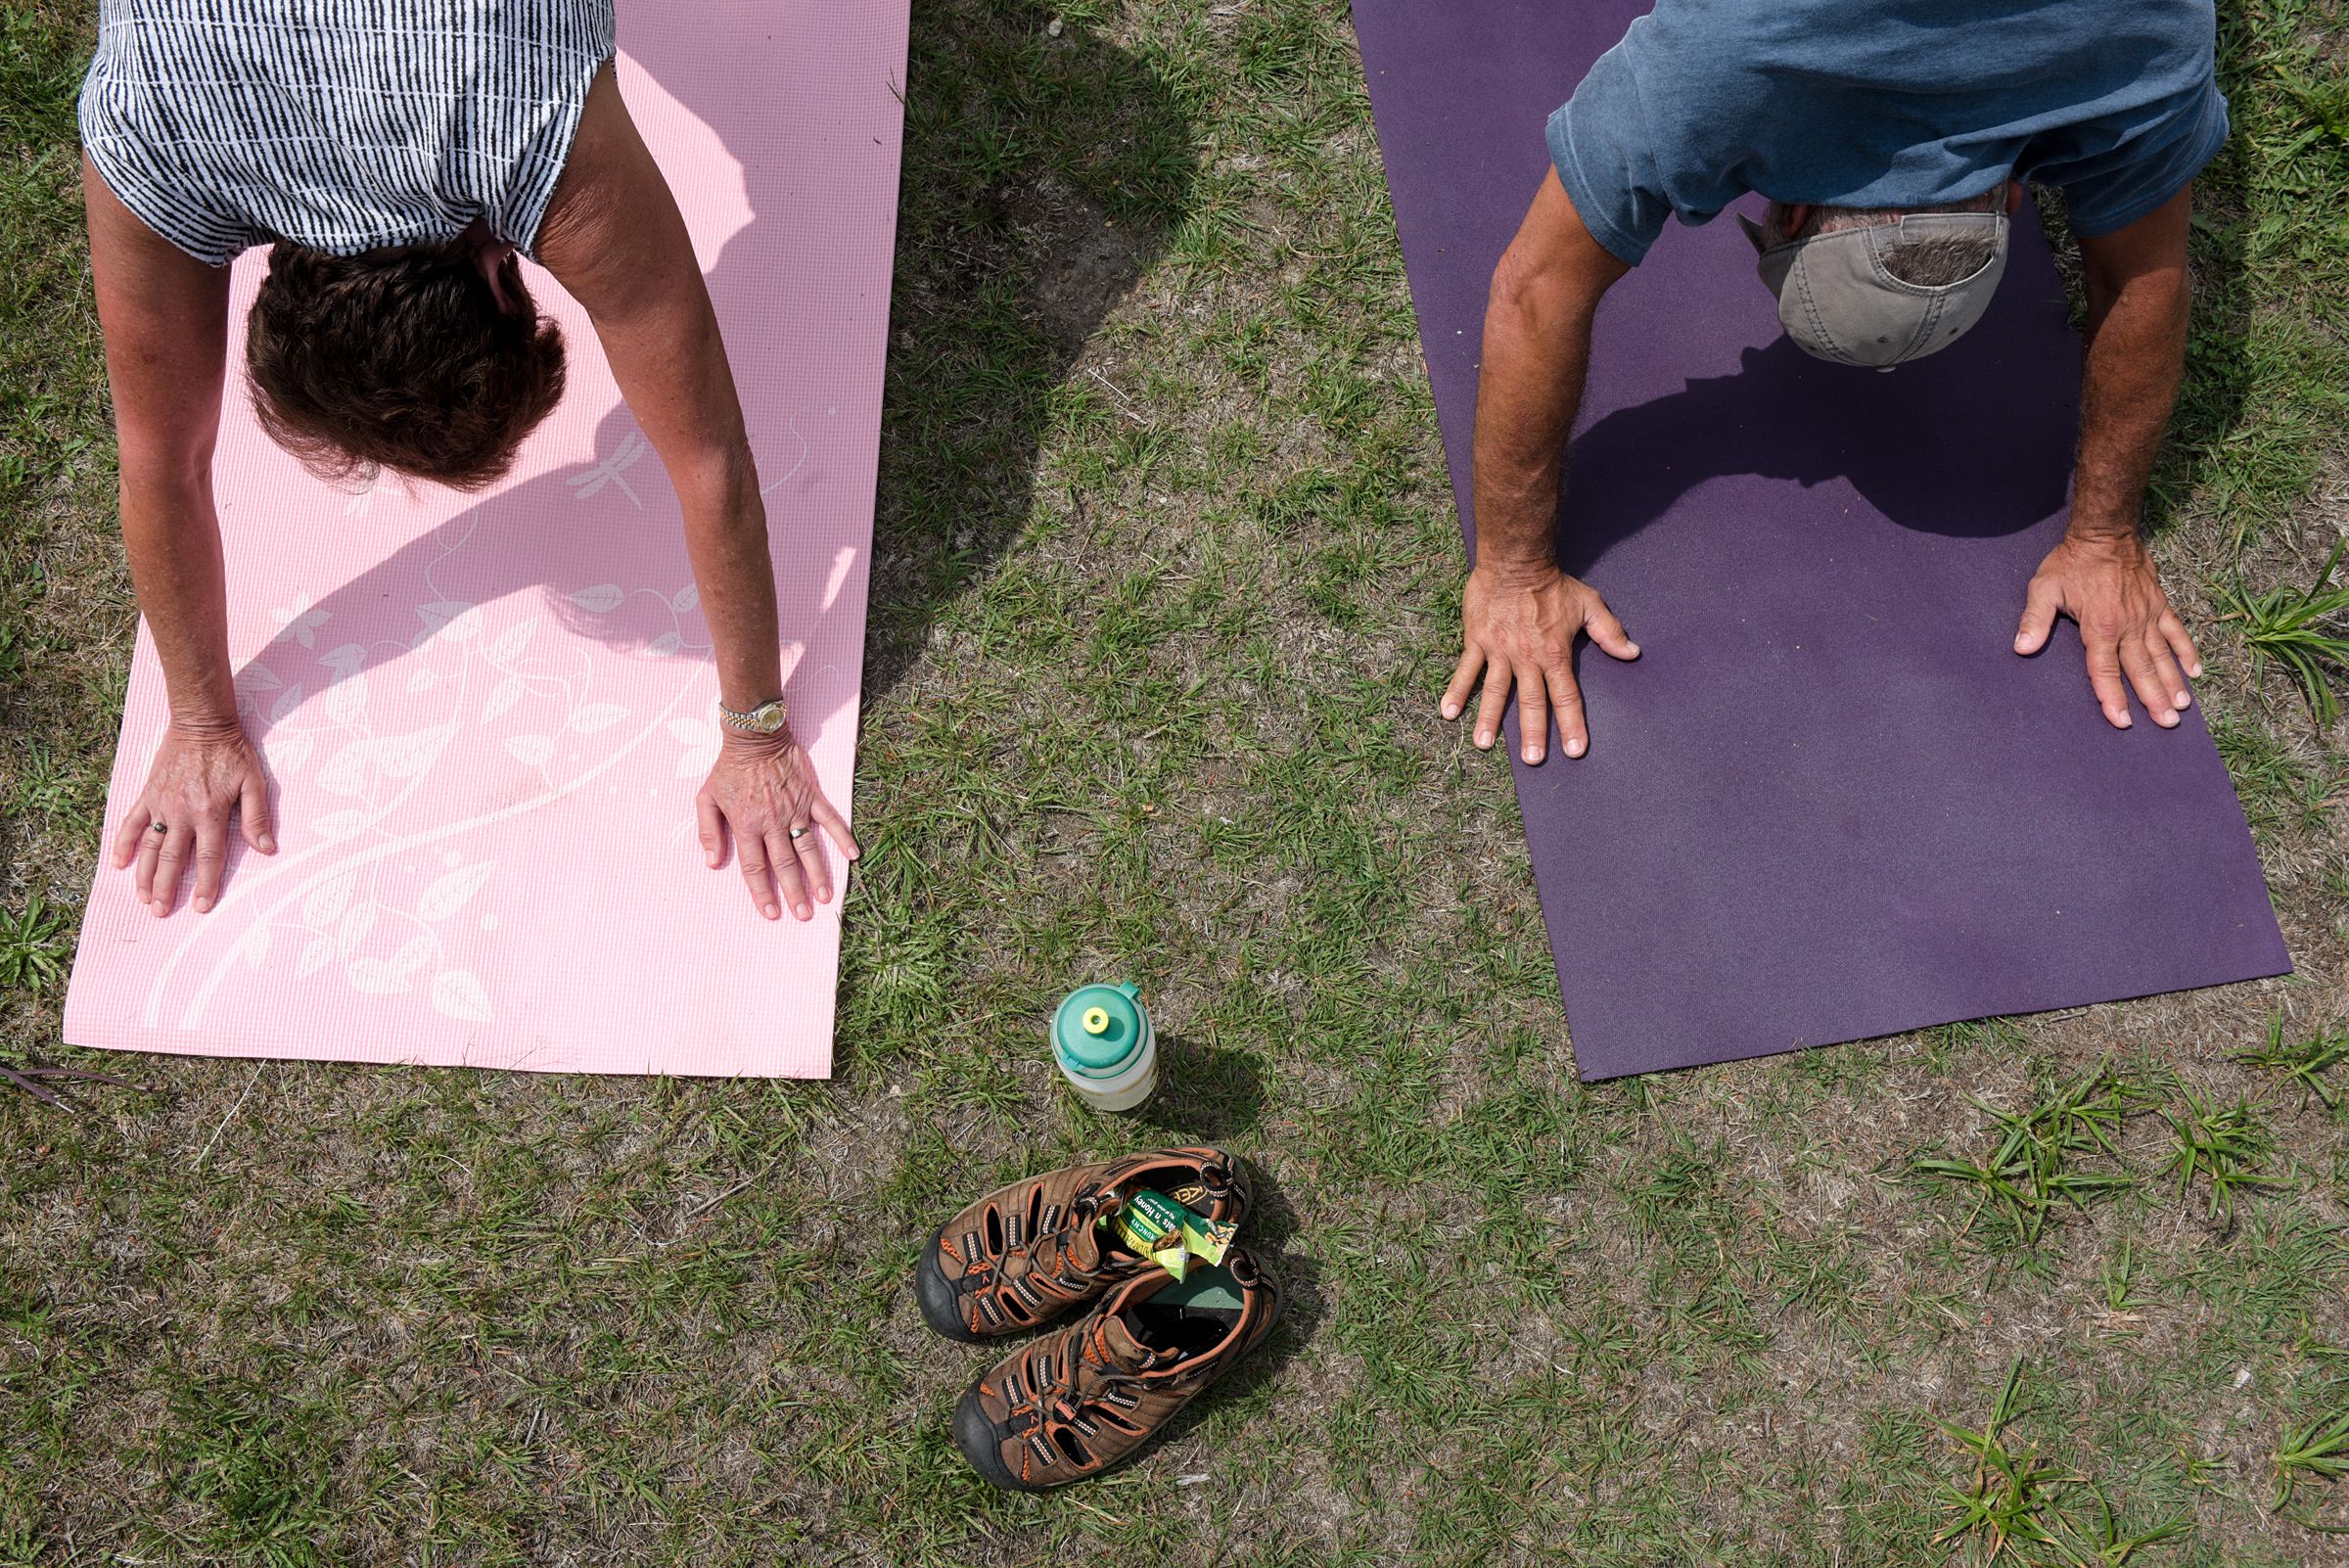 Linda Sacco, left, and Arthur Sacco, of Newbury, hold their downward dog position during yoga at the top of Mount Sunapee in Newbury, N.H., Wednesday, July 11, 2018. (Valley News - James M. Patterson) Copyright Valley News. May not be reprinted or used online without permission. Send requests to permission@vnews.com.